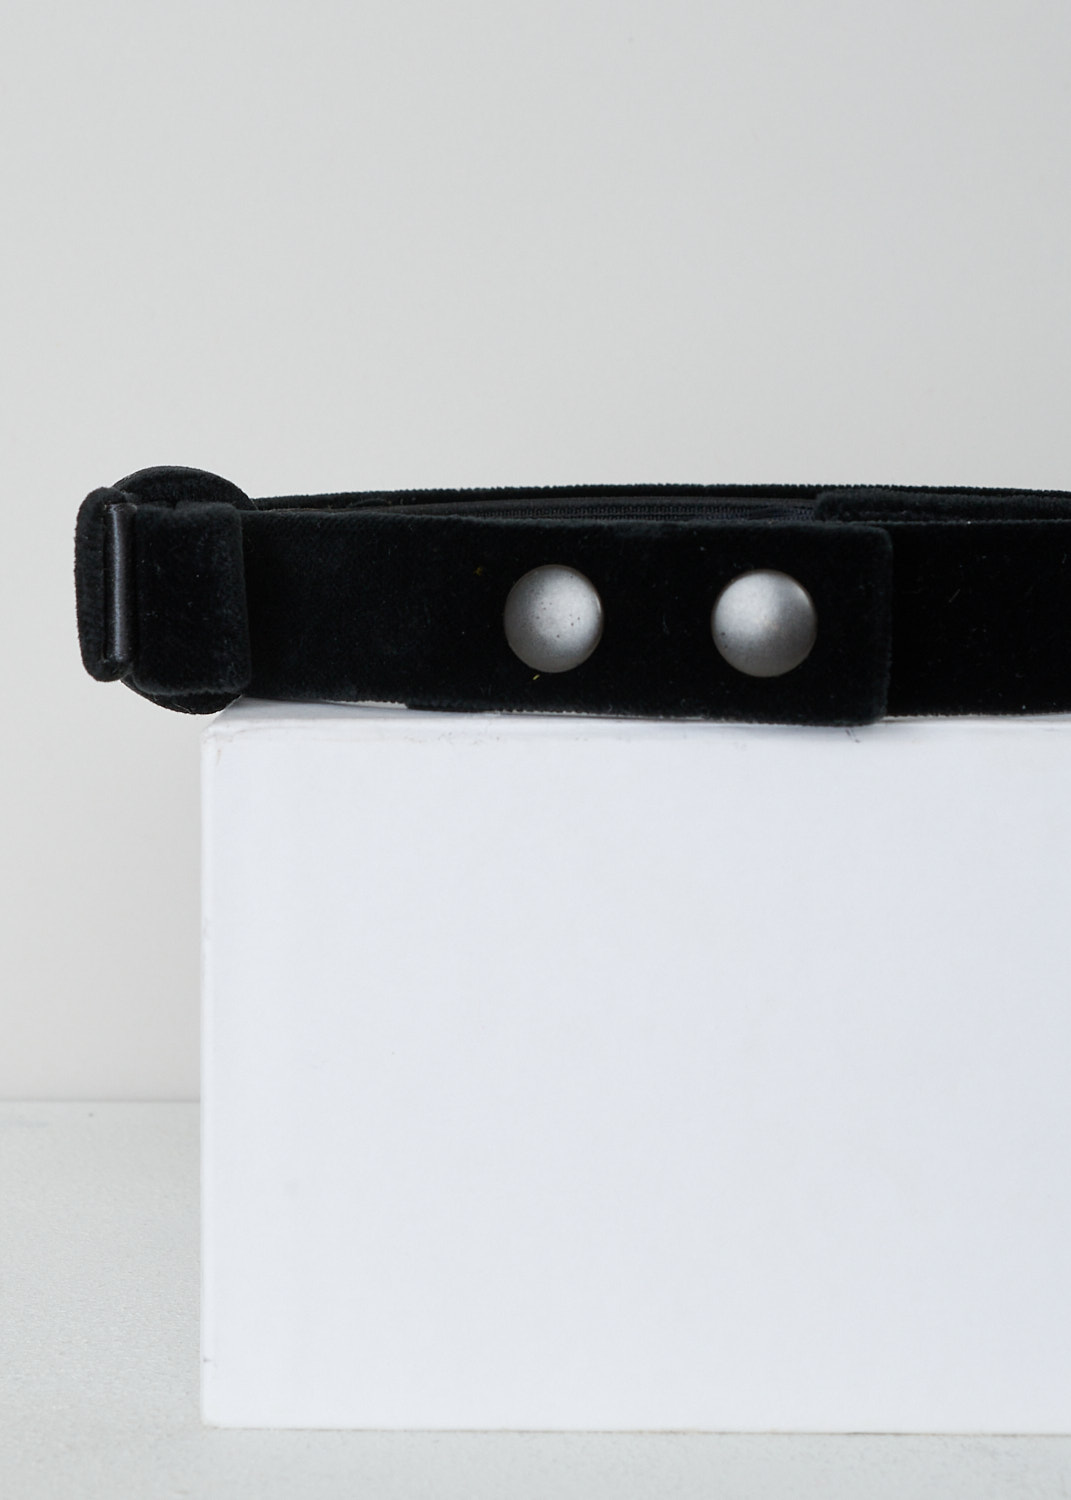 LANVIN, BLACK VELVET BELT WITH BOW, AW2B1HVELP5B_10_NOIR, Black, Detail 1, This black velvet belt is partly elasticated and has a two press stud closure. The belt has an adjustable and removable bow detail. 
